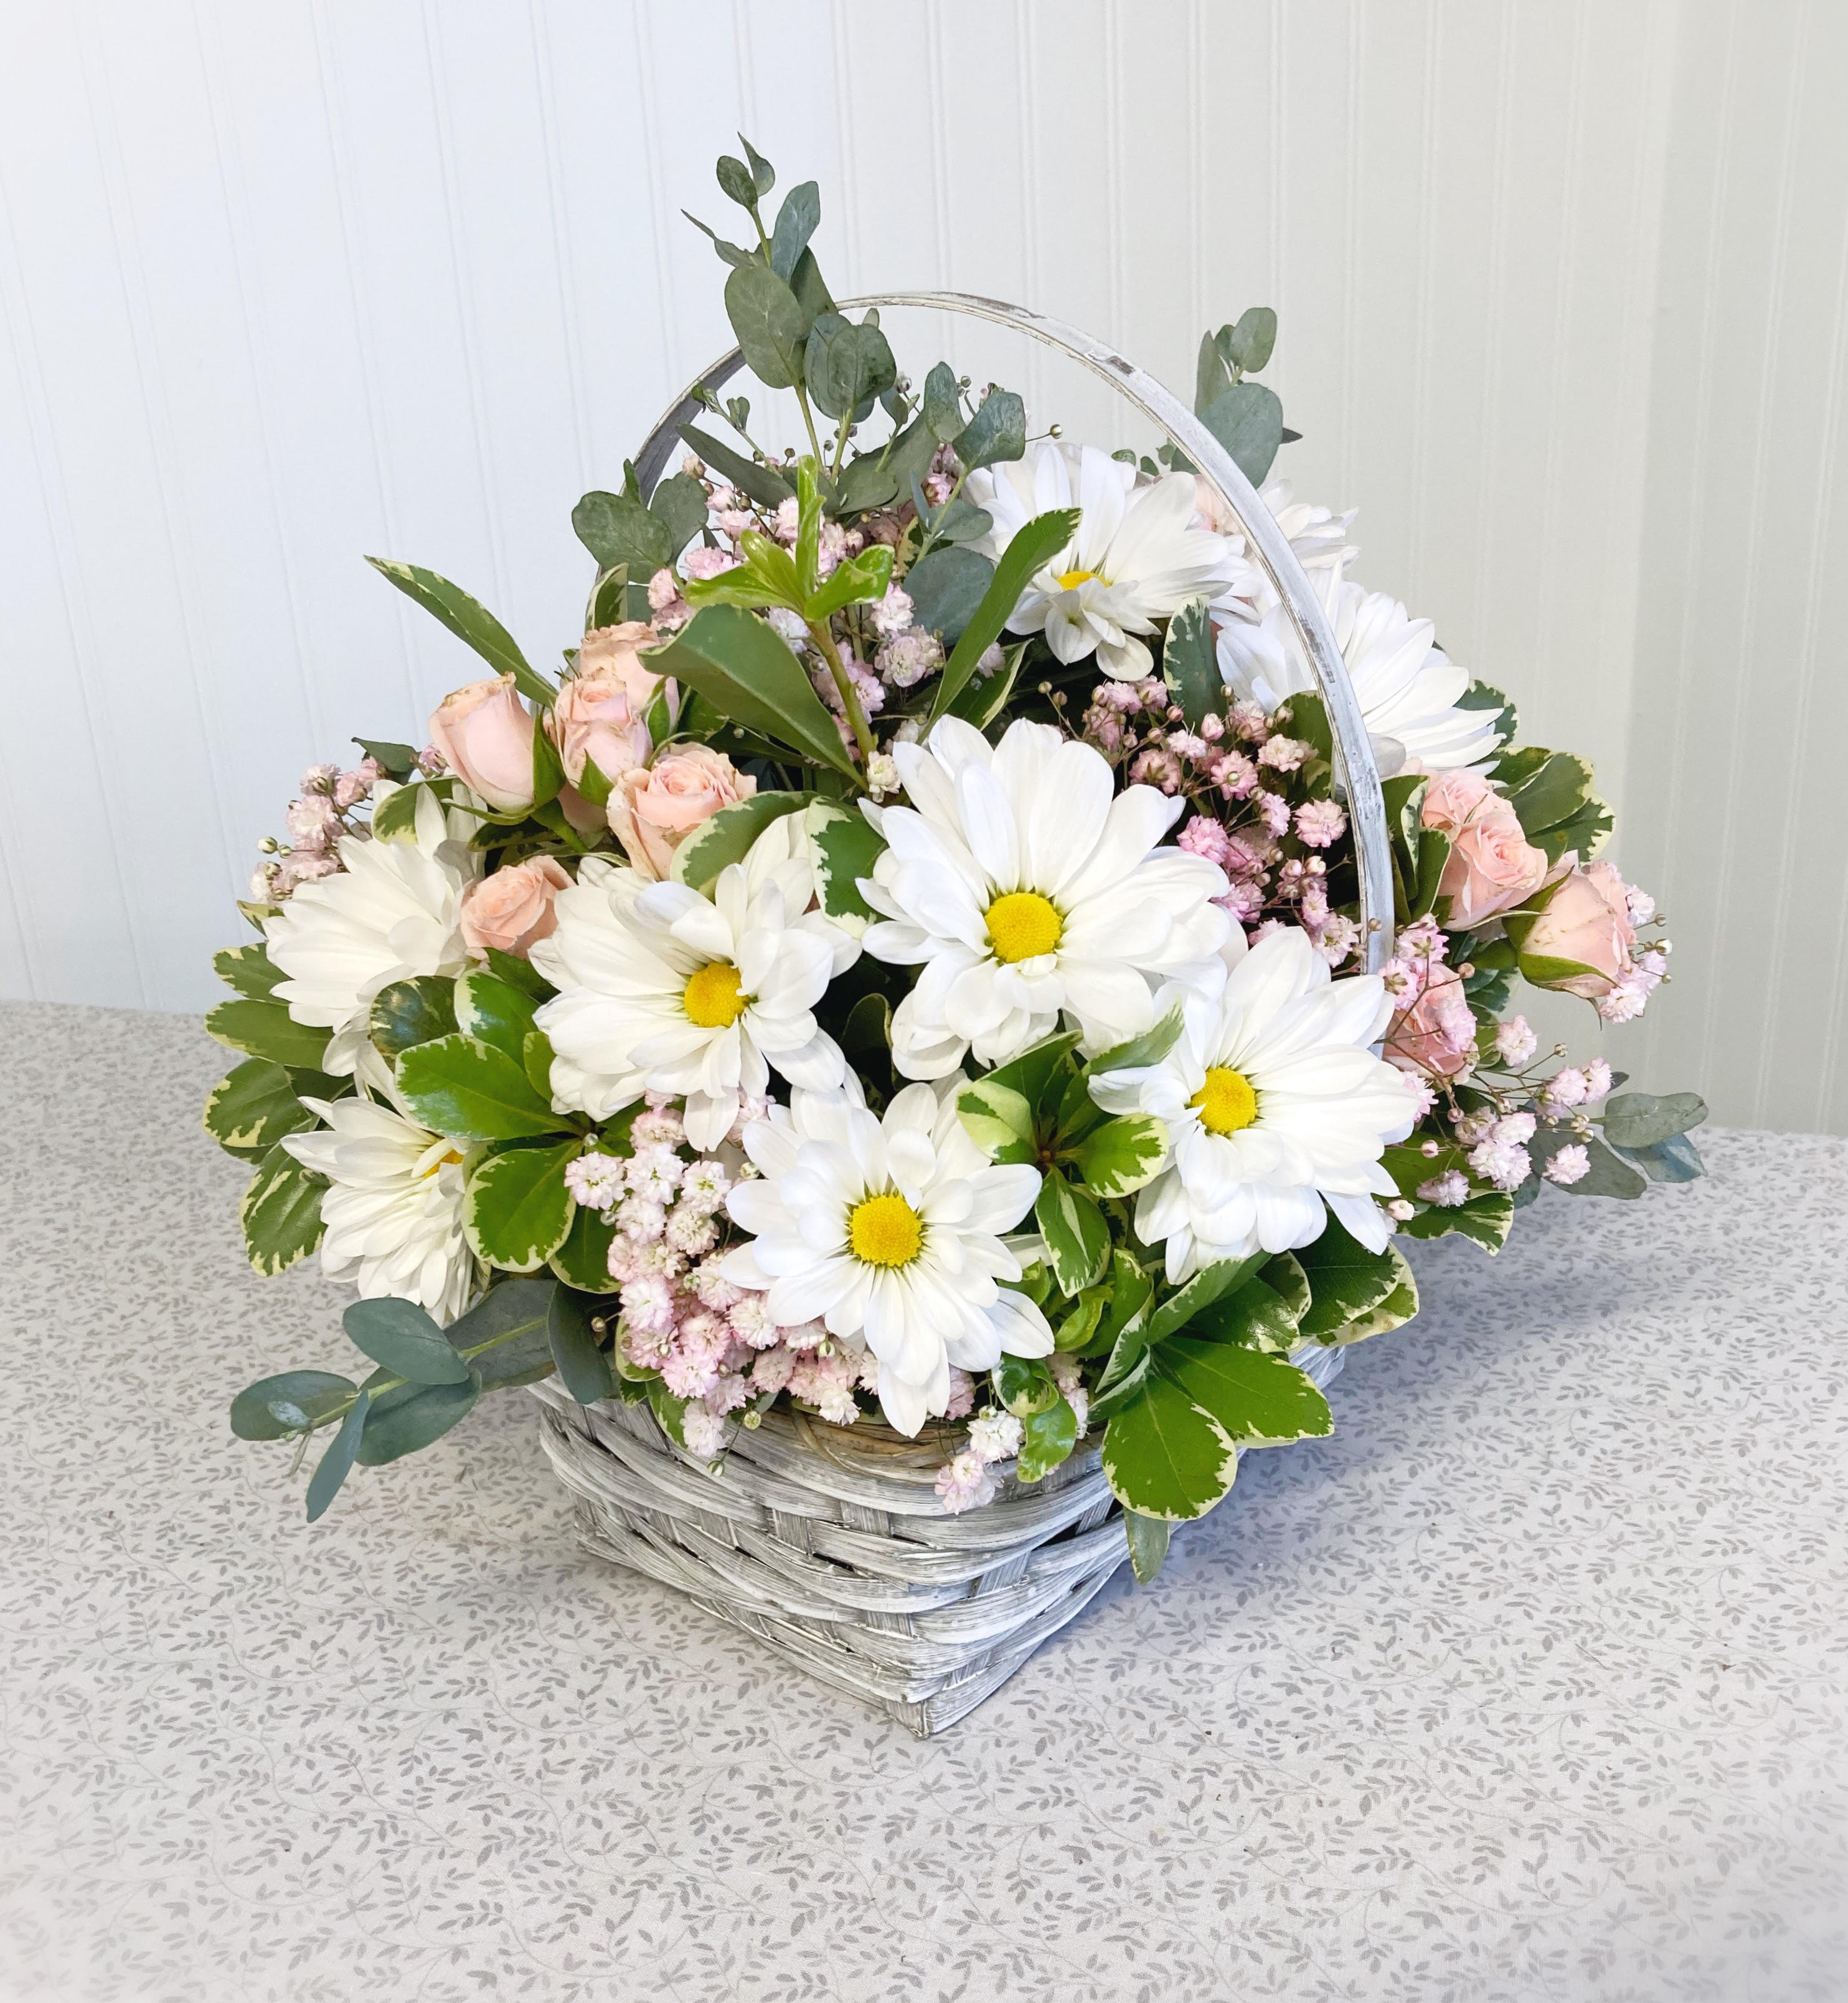 Sweet Daisy Surprise - Send a sweet gift to a friend today with this wicker basket arrangement filled with delicate pink flowers and white daisies!